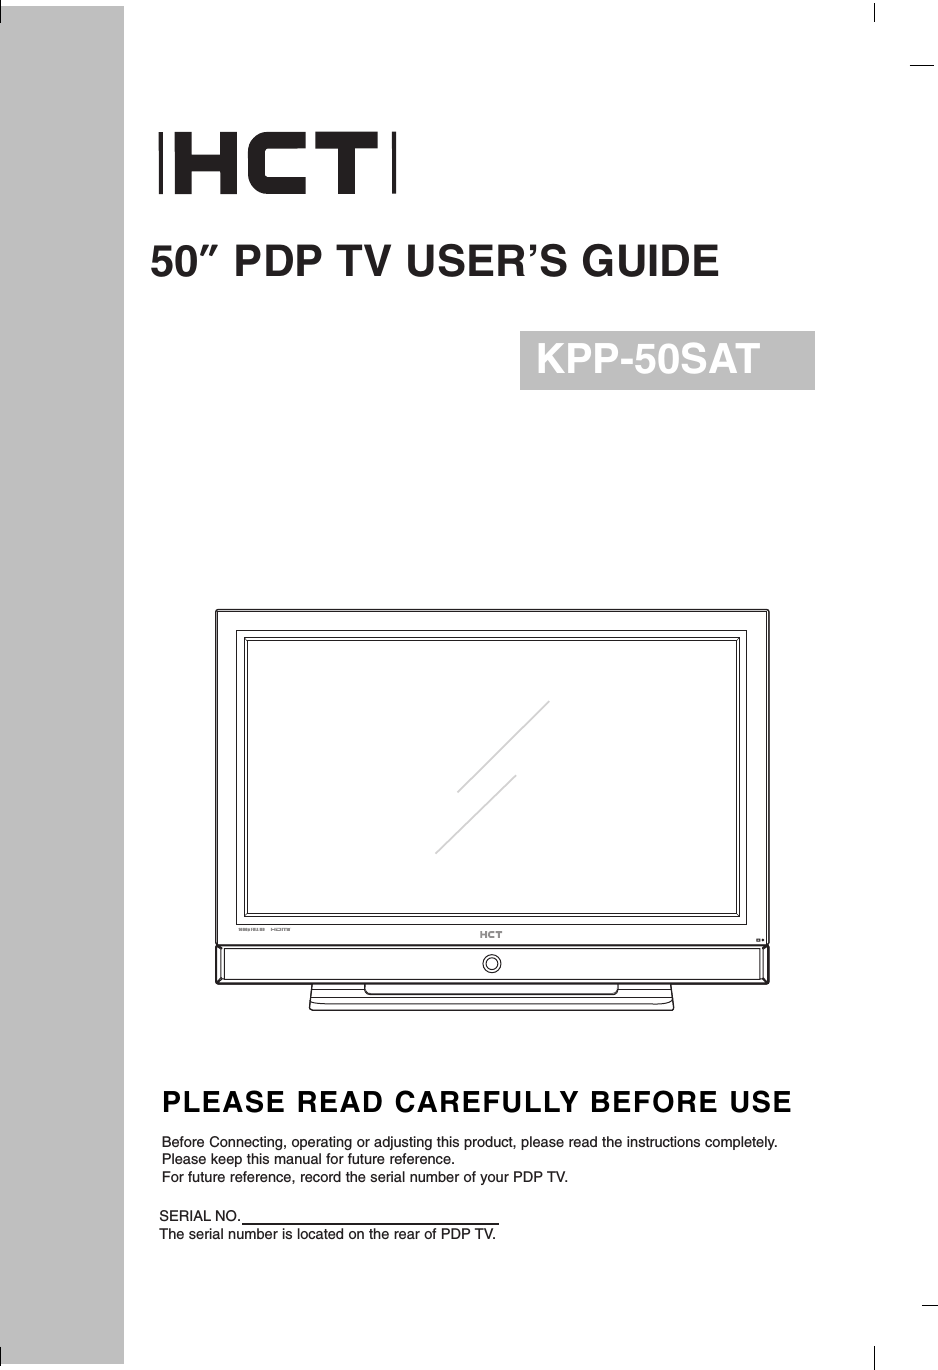 50”PDP TV USER’S GUIDEKPP-50SATPLEASE READ CAREFULLY BEFORE USEBefore Connecting, operating or adjusting this product, please read the instructions completely.Please keep this manual for future reference.For future reference, record the serial number of your PDP TV.SERIAL NO.The serial number is located on the rear of PDP TV.